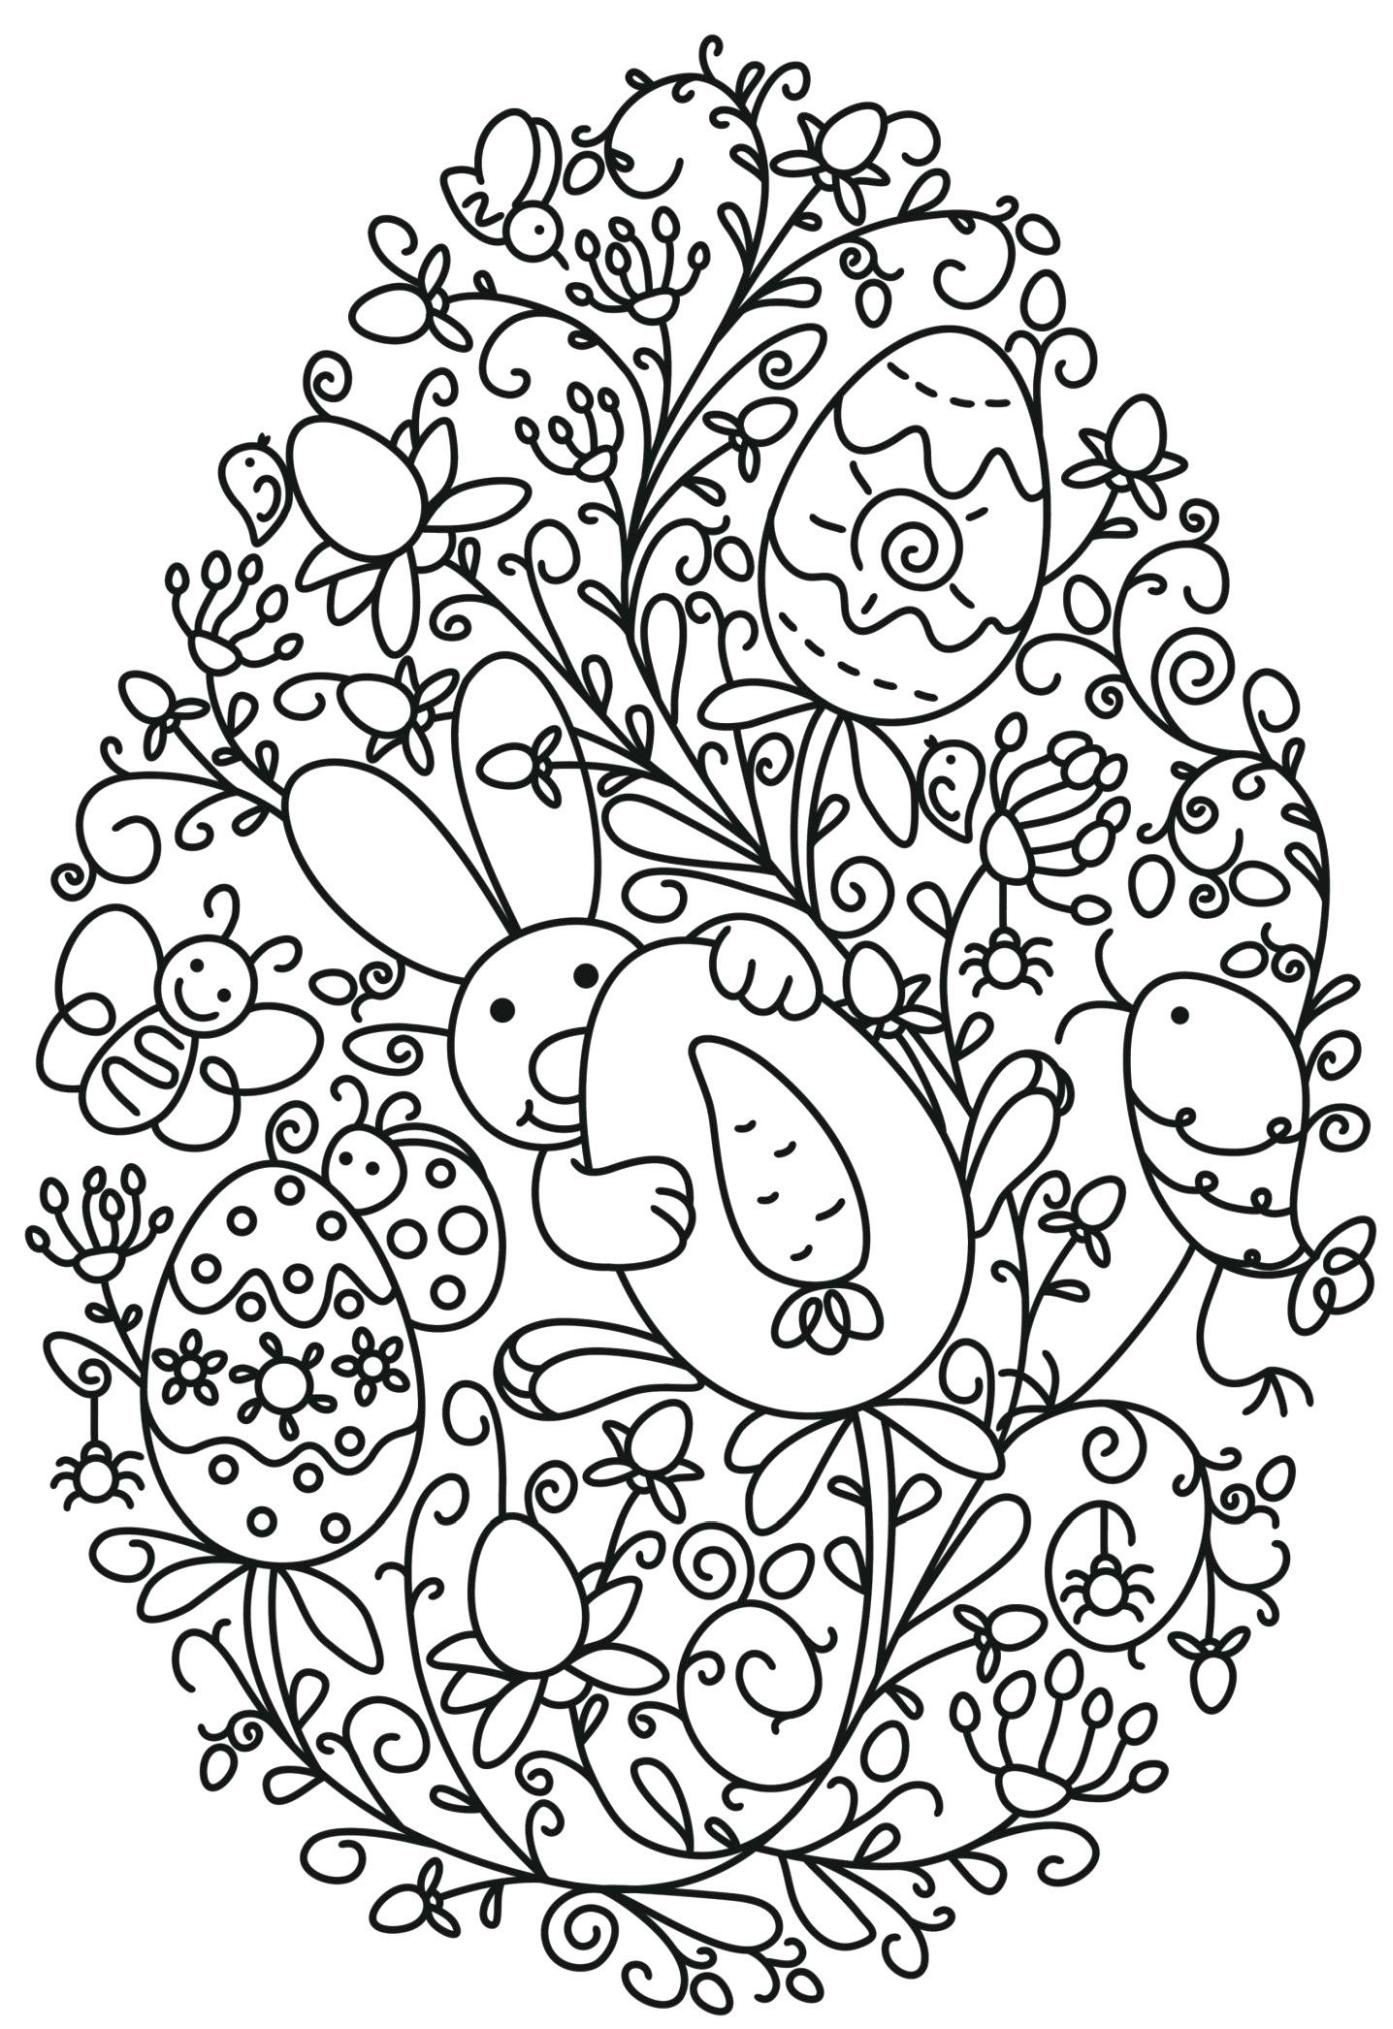 get-this-adult-easter-coloring-pages-funny-easter-bunny-holding-an-egg